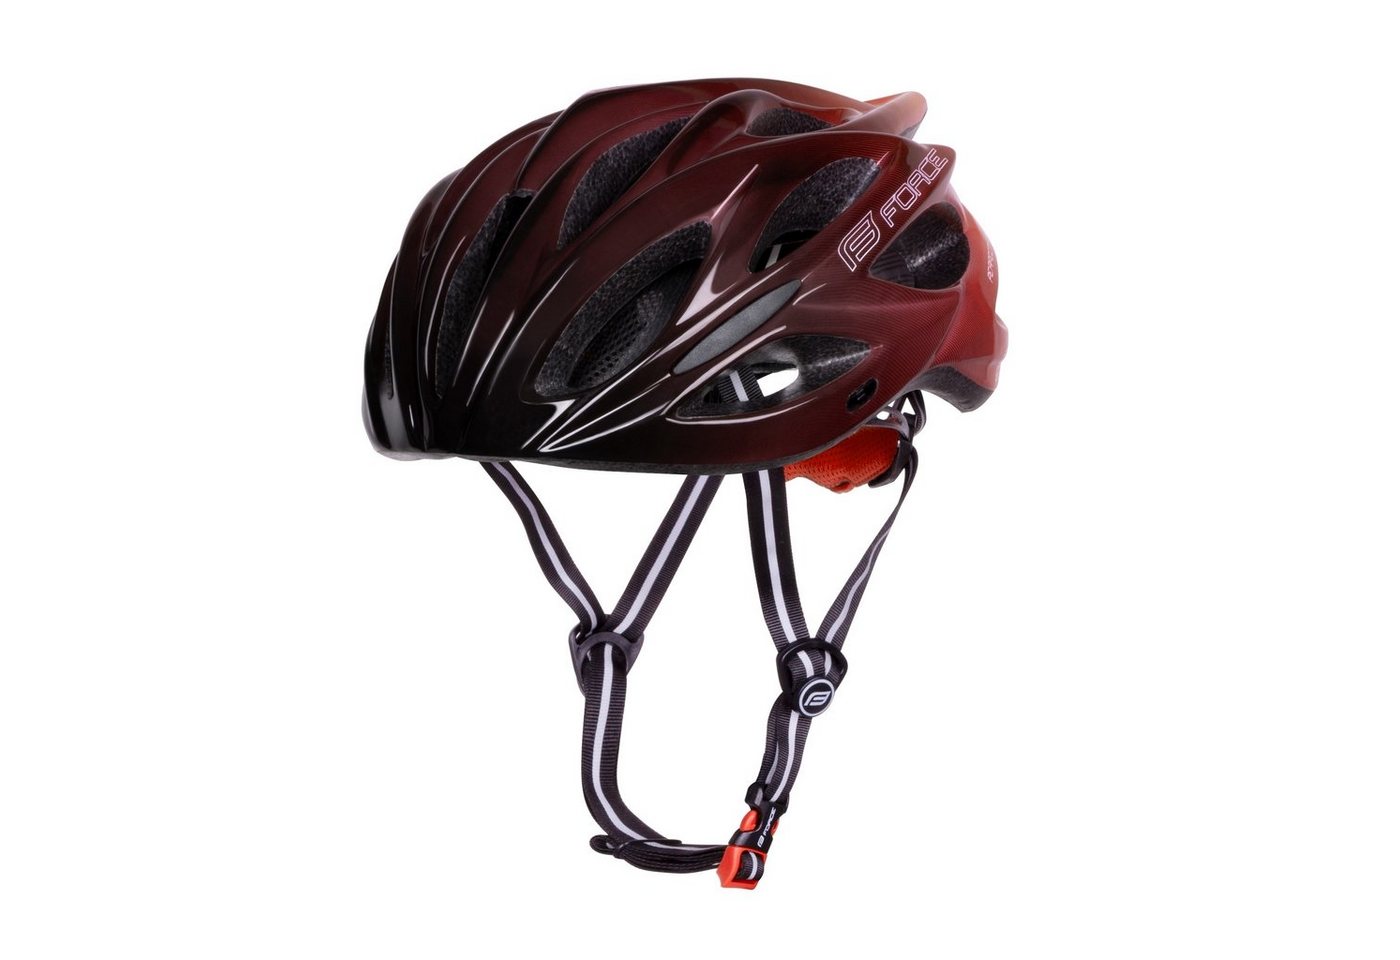 FORCE Fahrradhelm FORCE Helm BULL HUE MIPS schwarz-rot S-M von FORCE